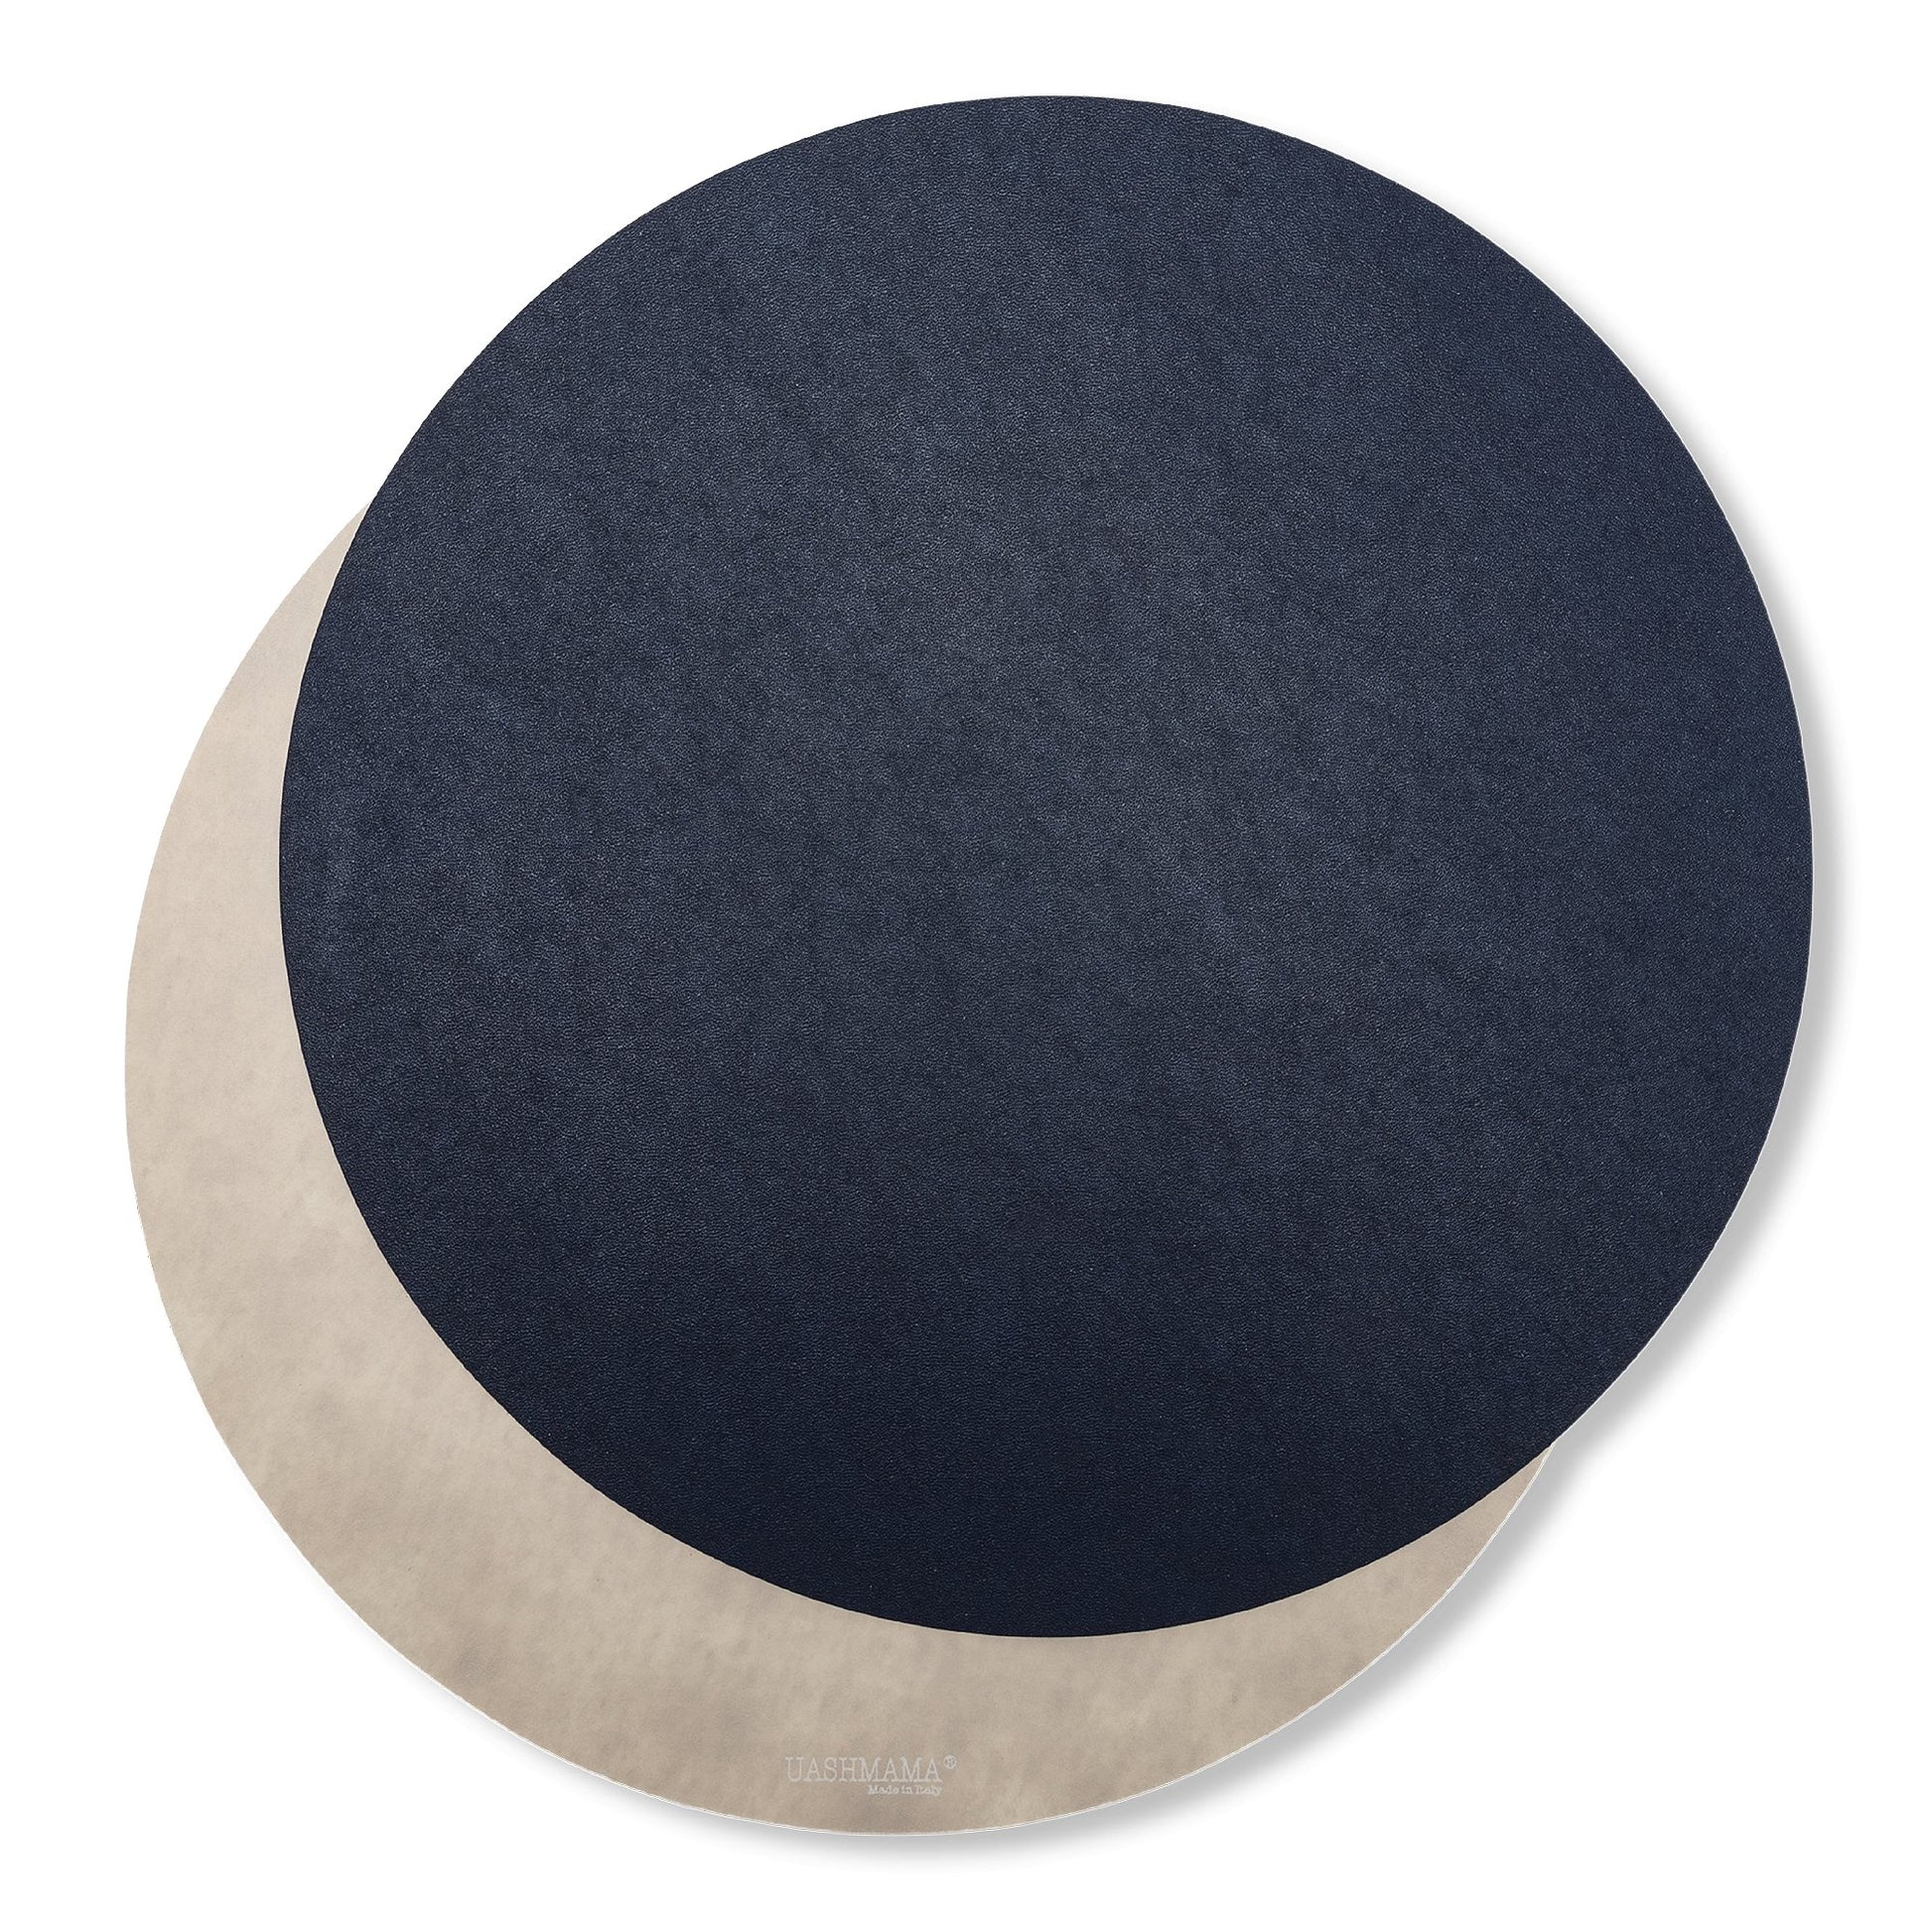 Two round washable paper placemats are shown one on top of the other. The one in the foreground is navy and the one at rear is beige.